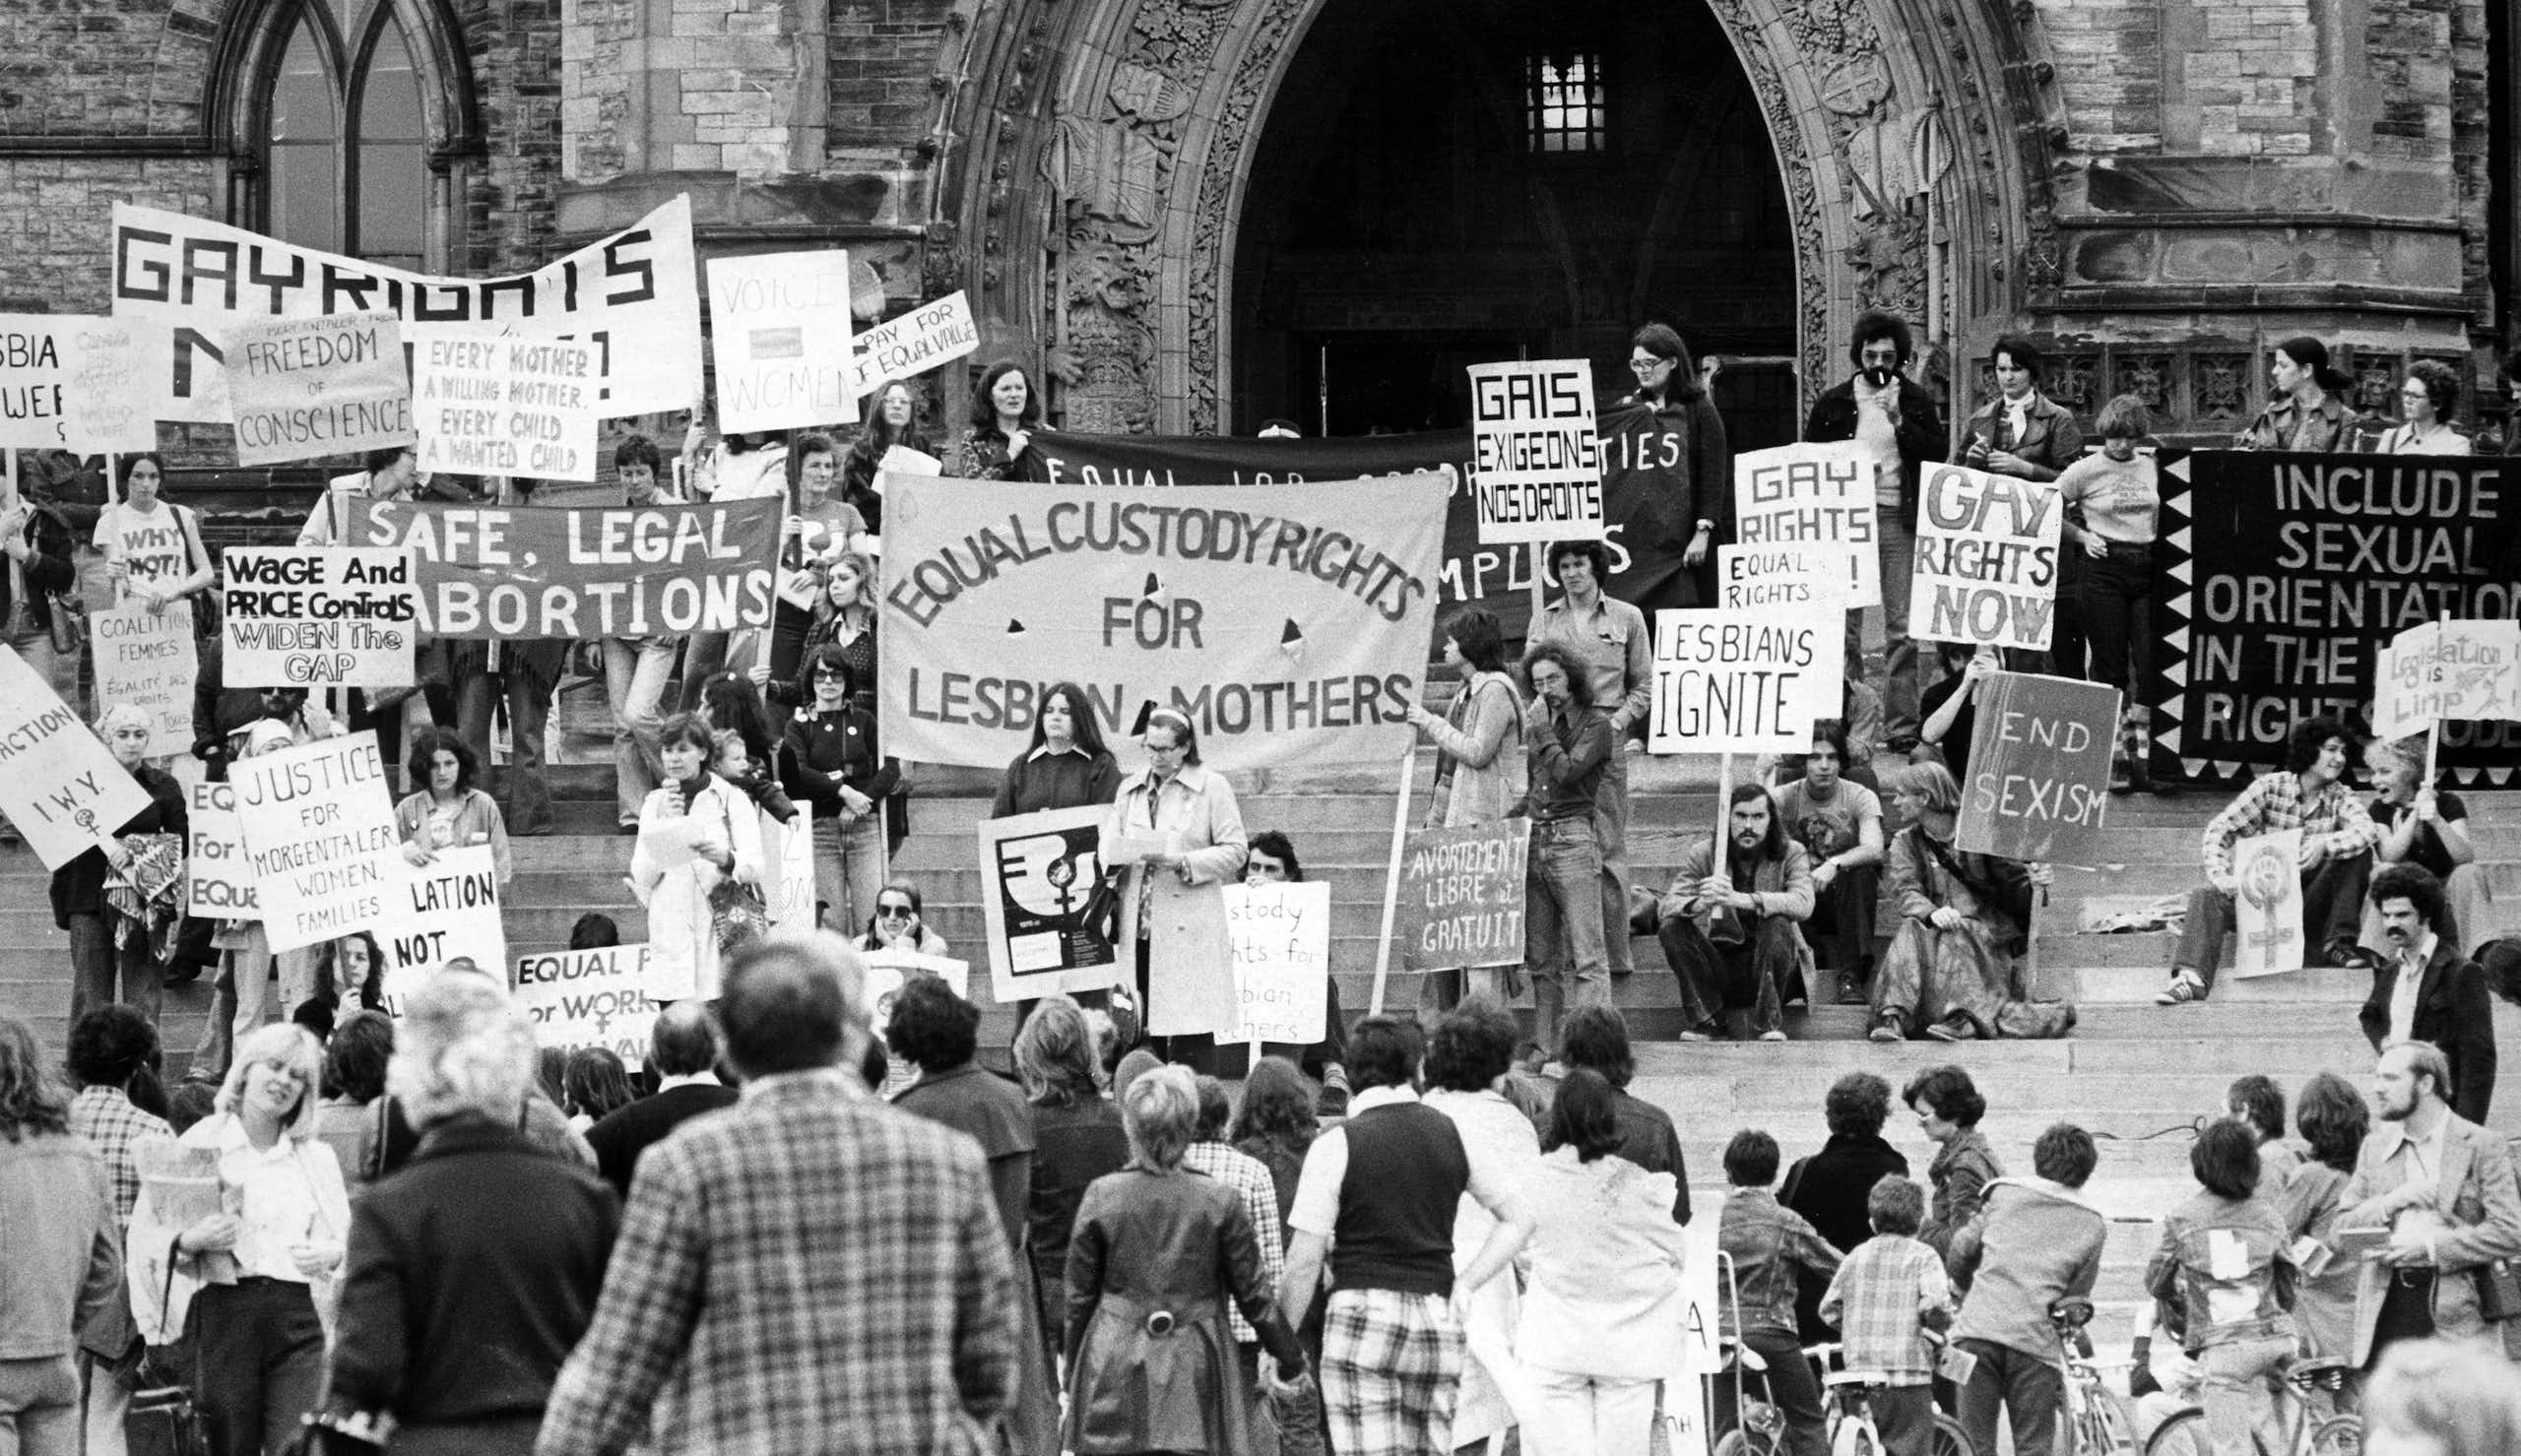 A black and white photo of people at a demonstration with signs calling for equal rights for LGBT people